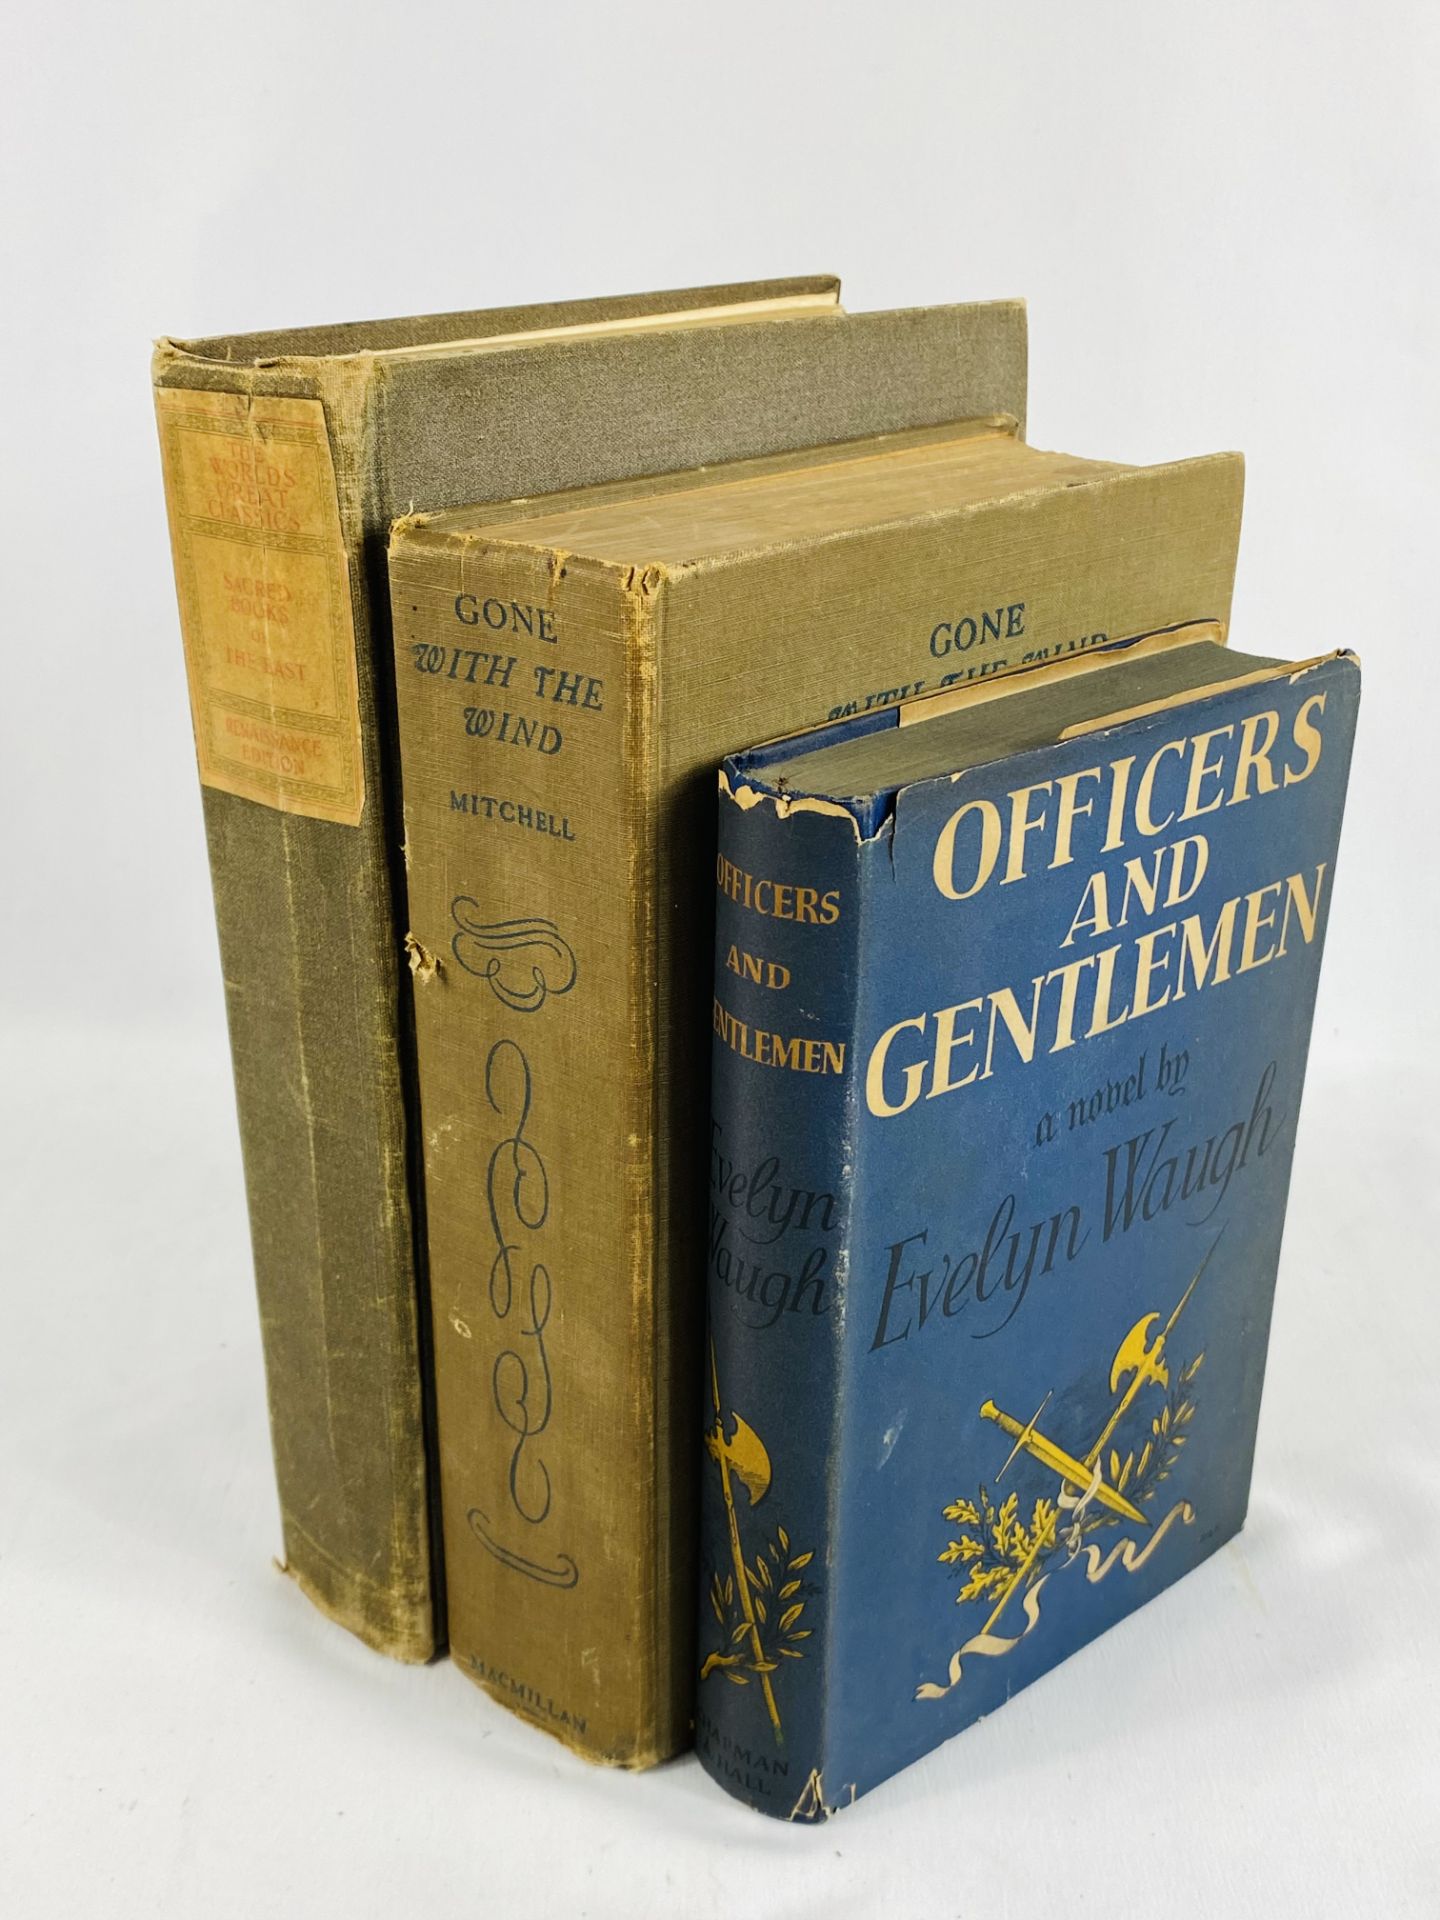 Office and Gentleman by Evelyn Waugh and other books